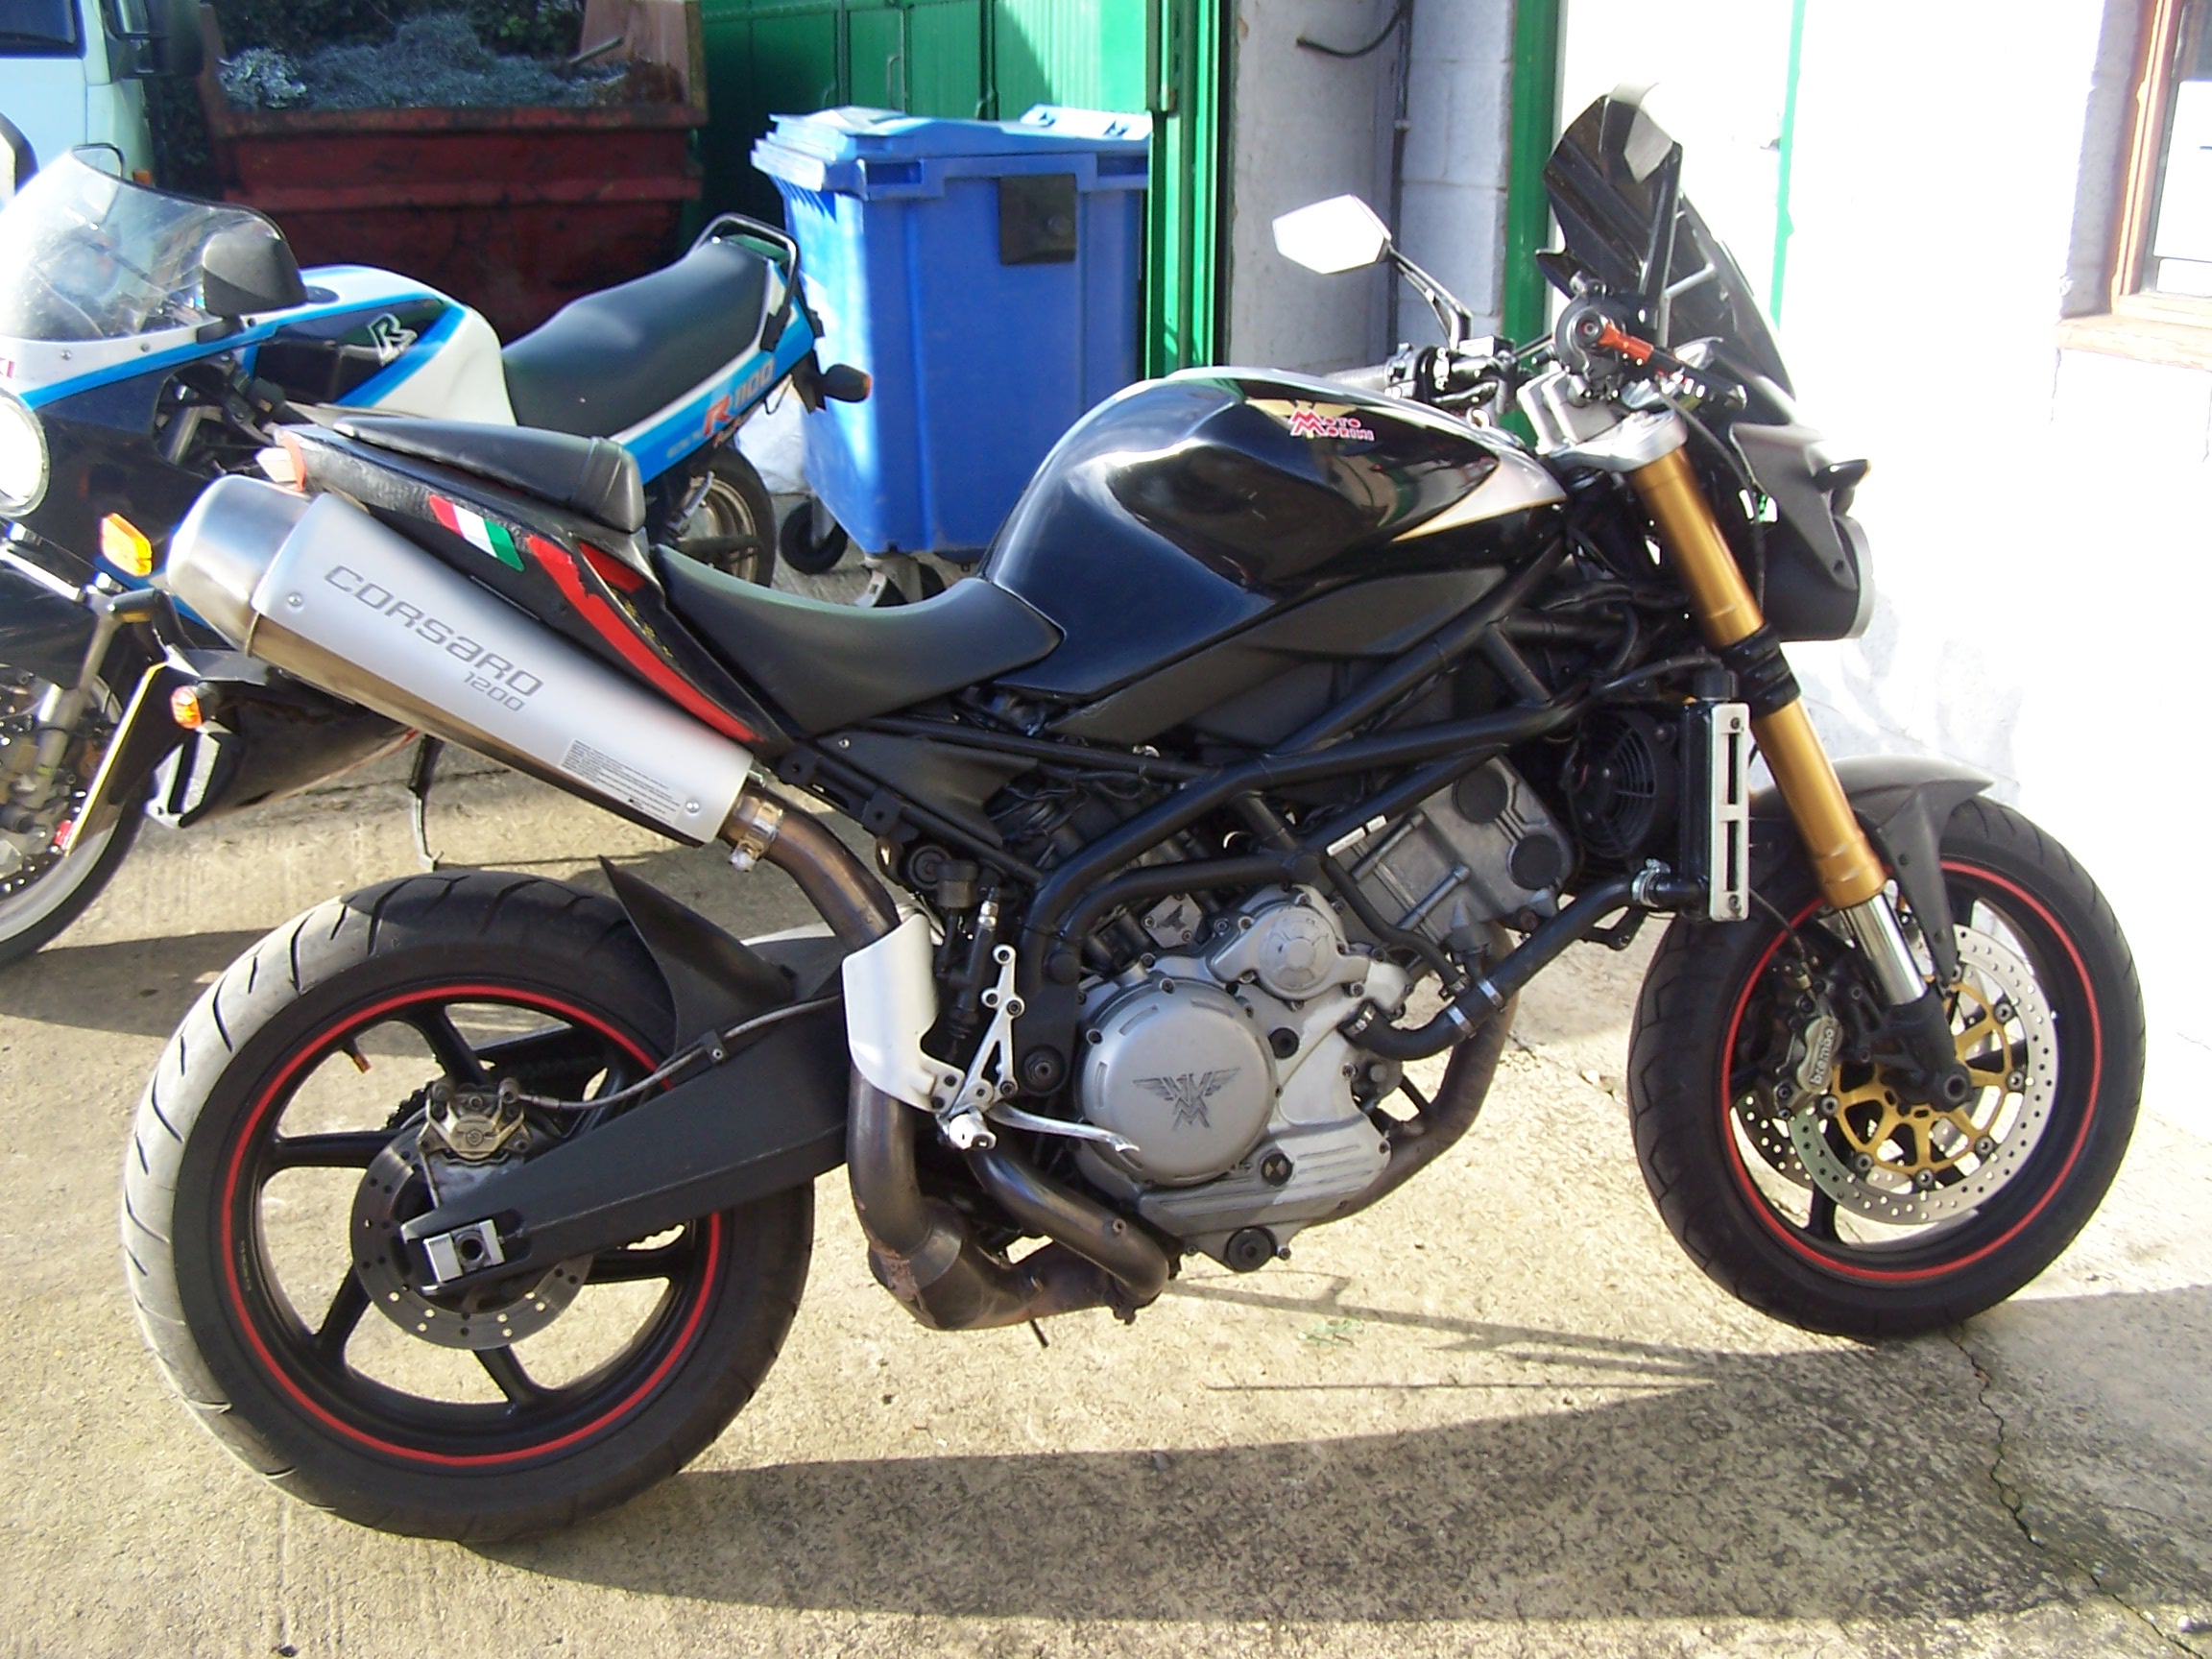 2007 Moto Morini 1200 Corsaro ECU remap to cure poor running and an unhappy owner